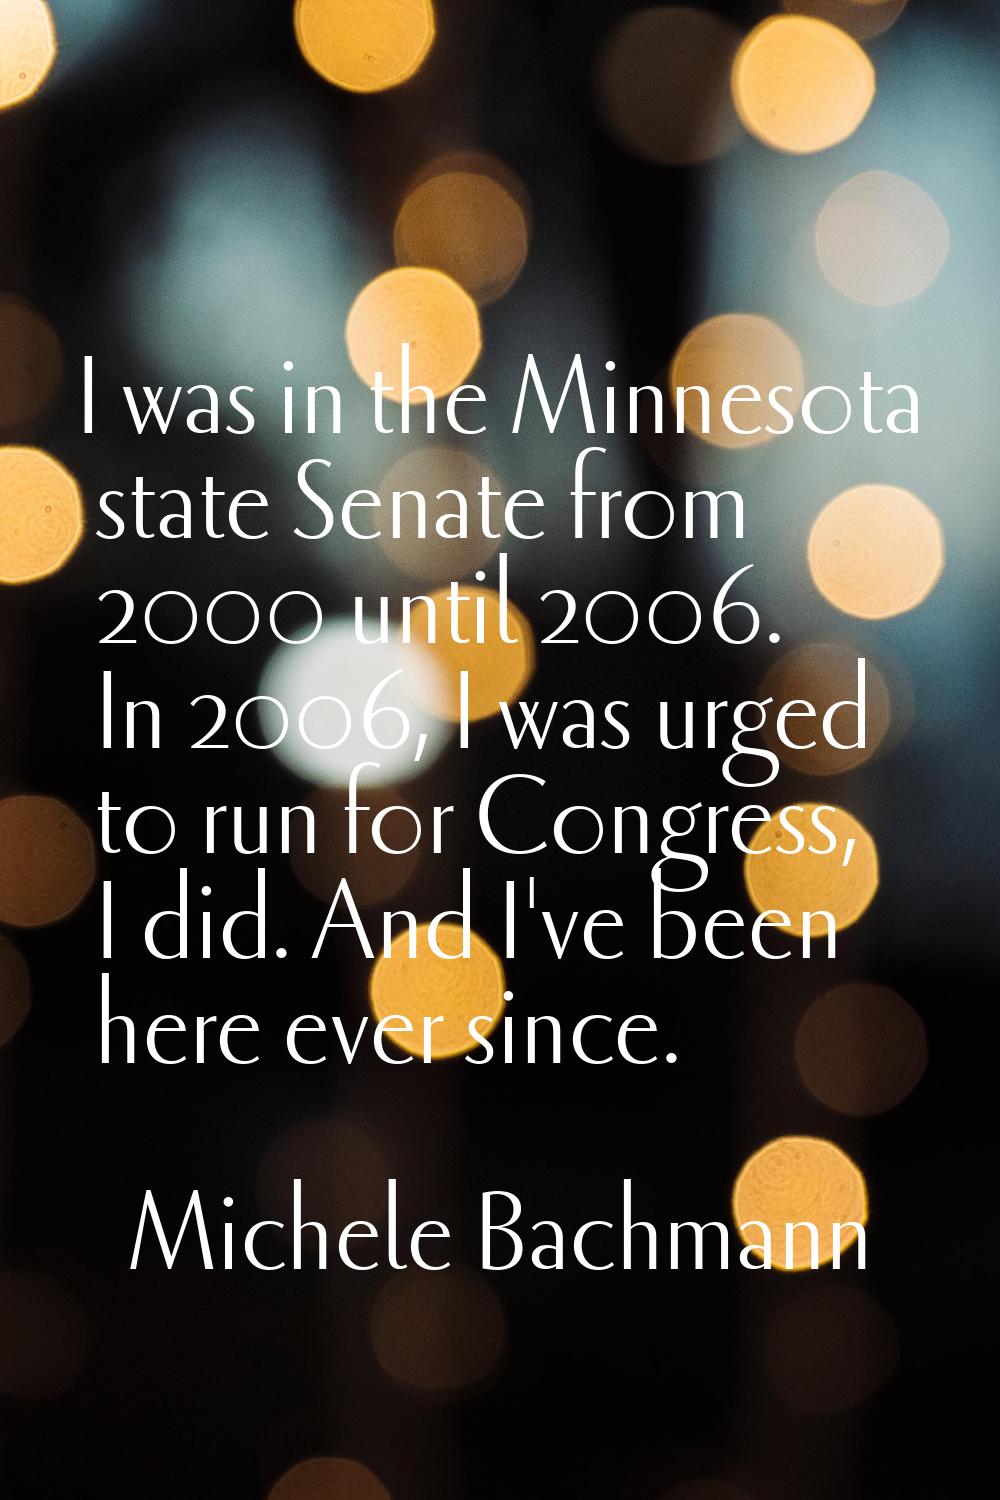 I was in the Minnesota state Senate from 2000 until 2006. In 2006, I was urged to run for Congress,